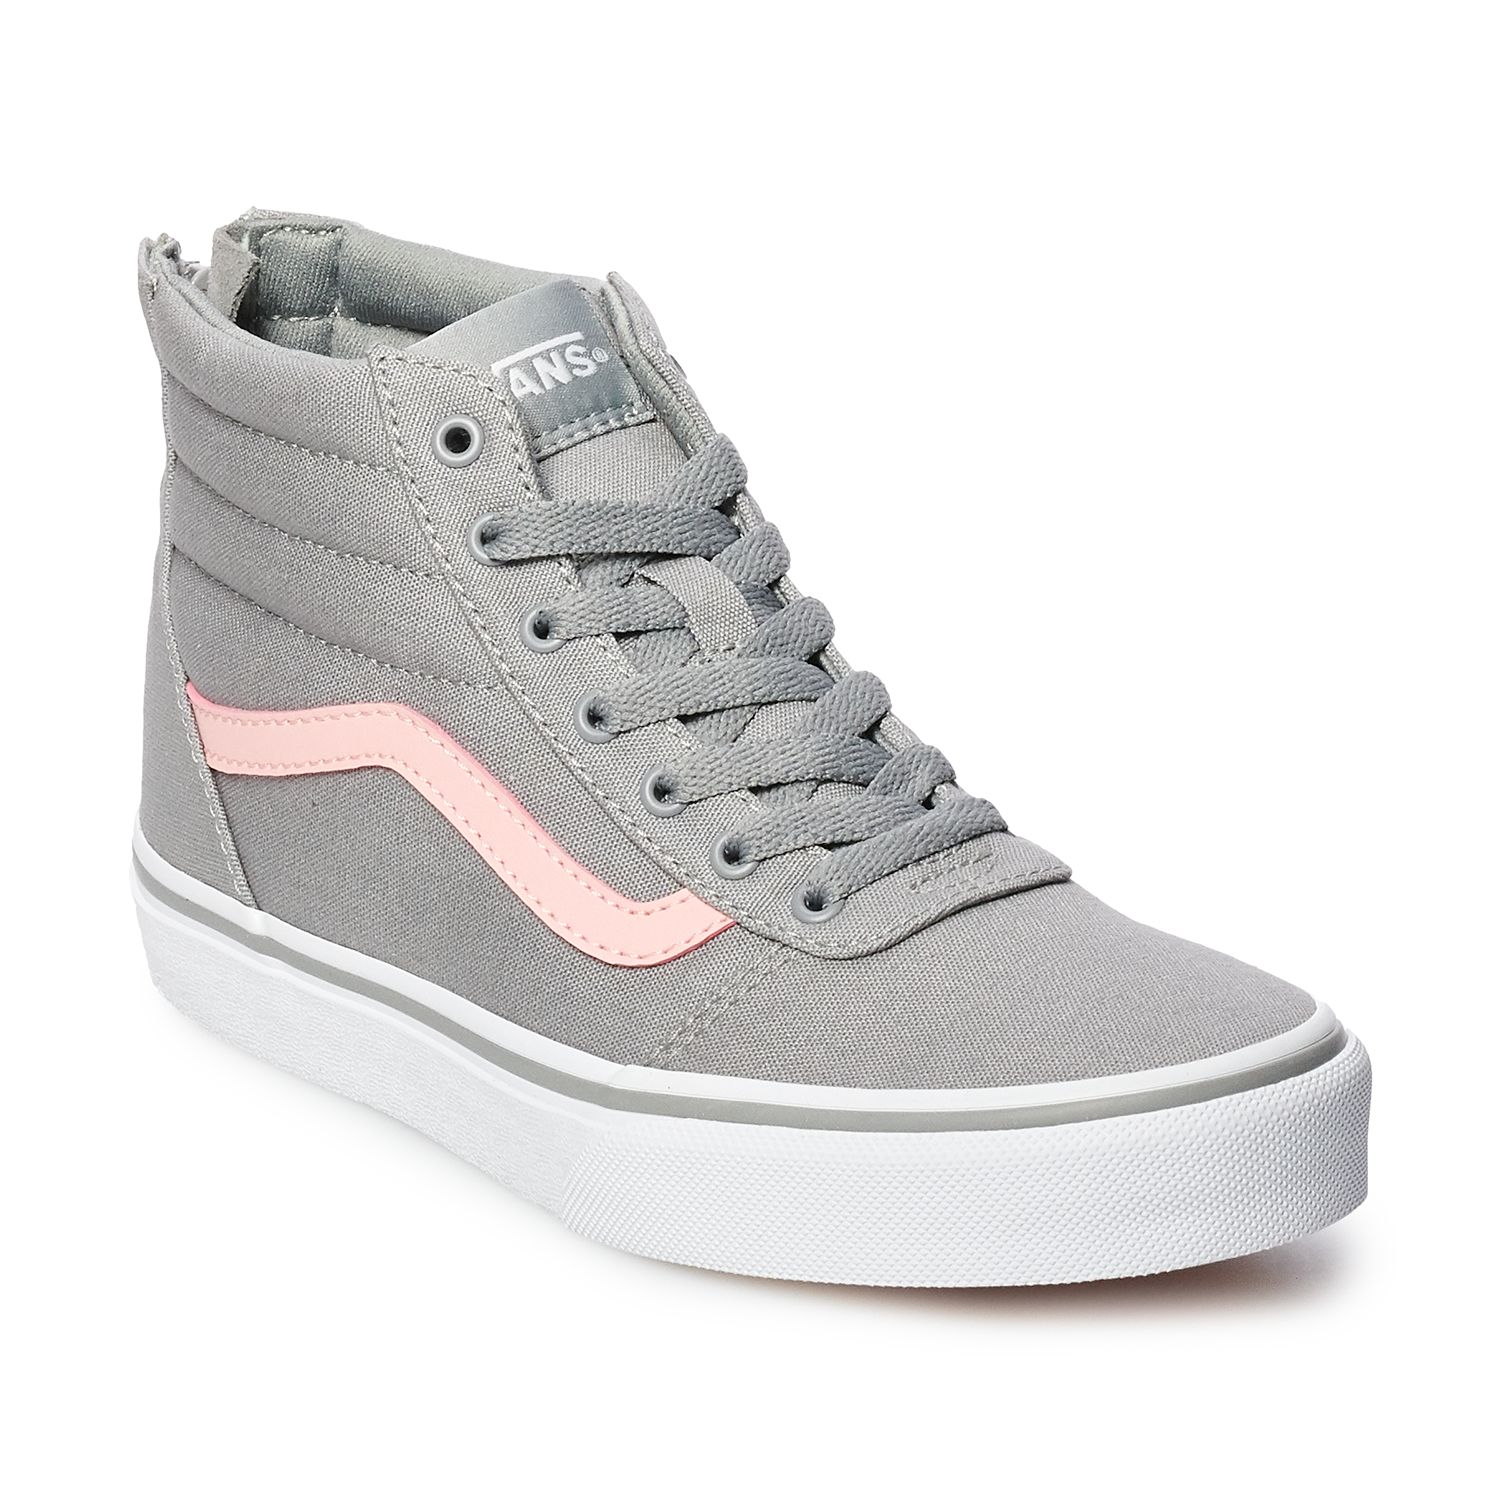 gray and pink high top vans